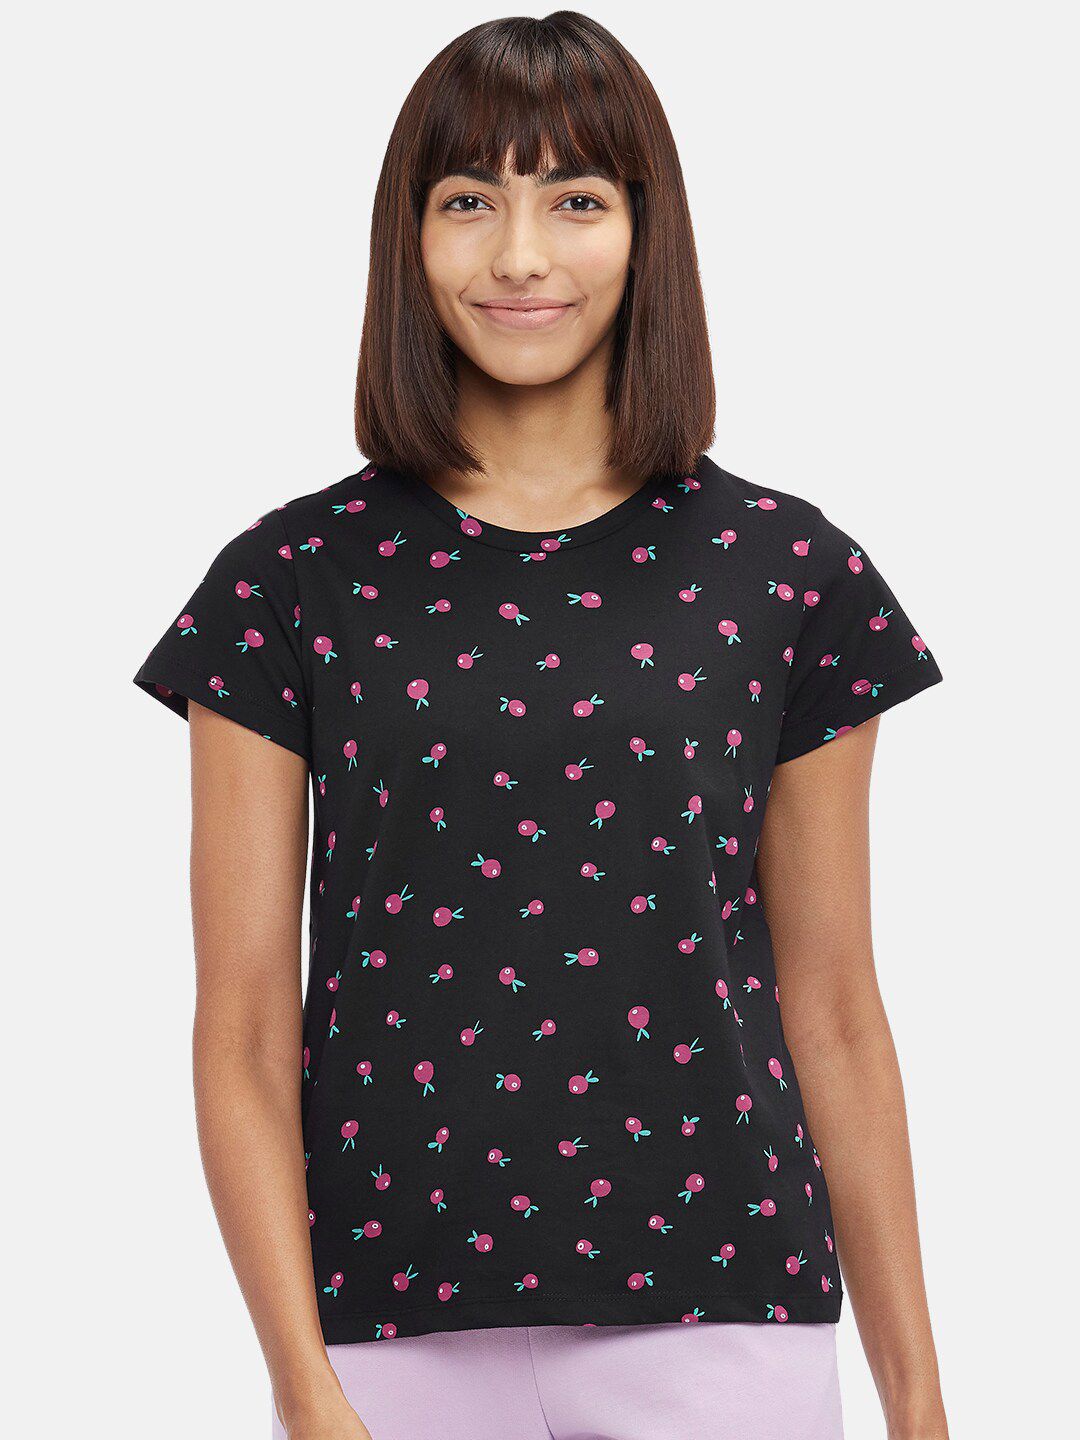 Dreamz by Pantaloons Black Floral Print Lounge tshirt Price in India